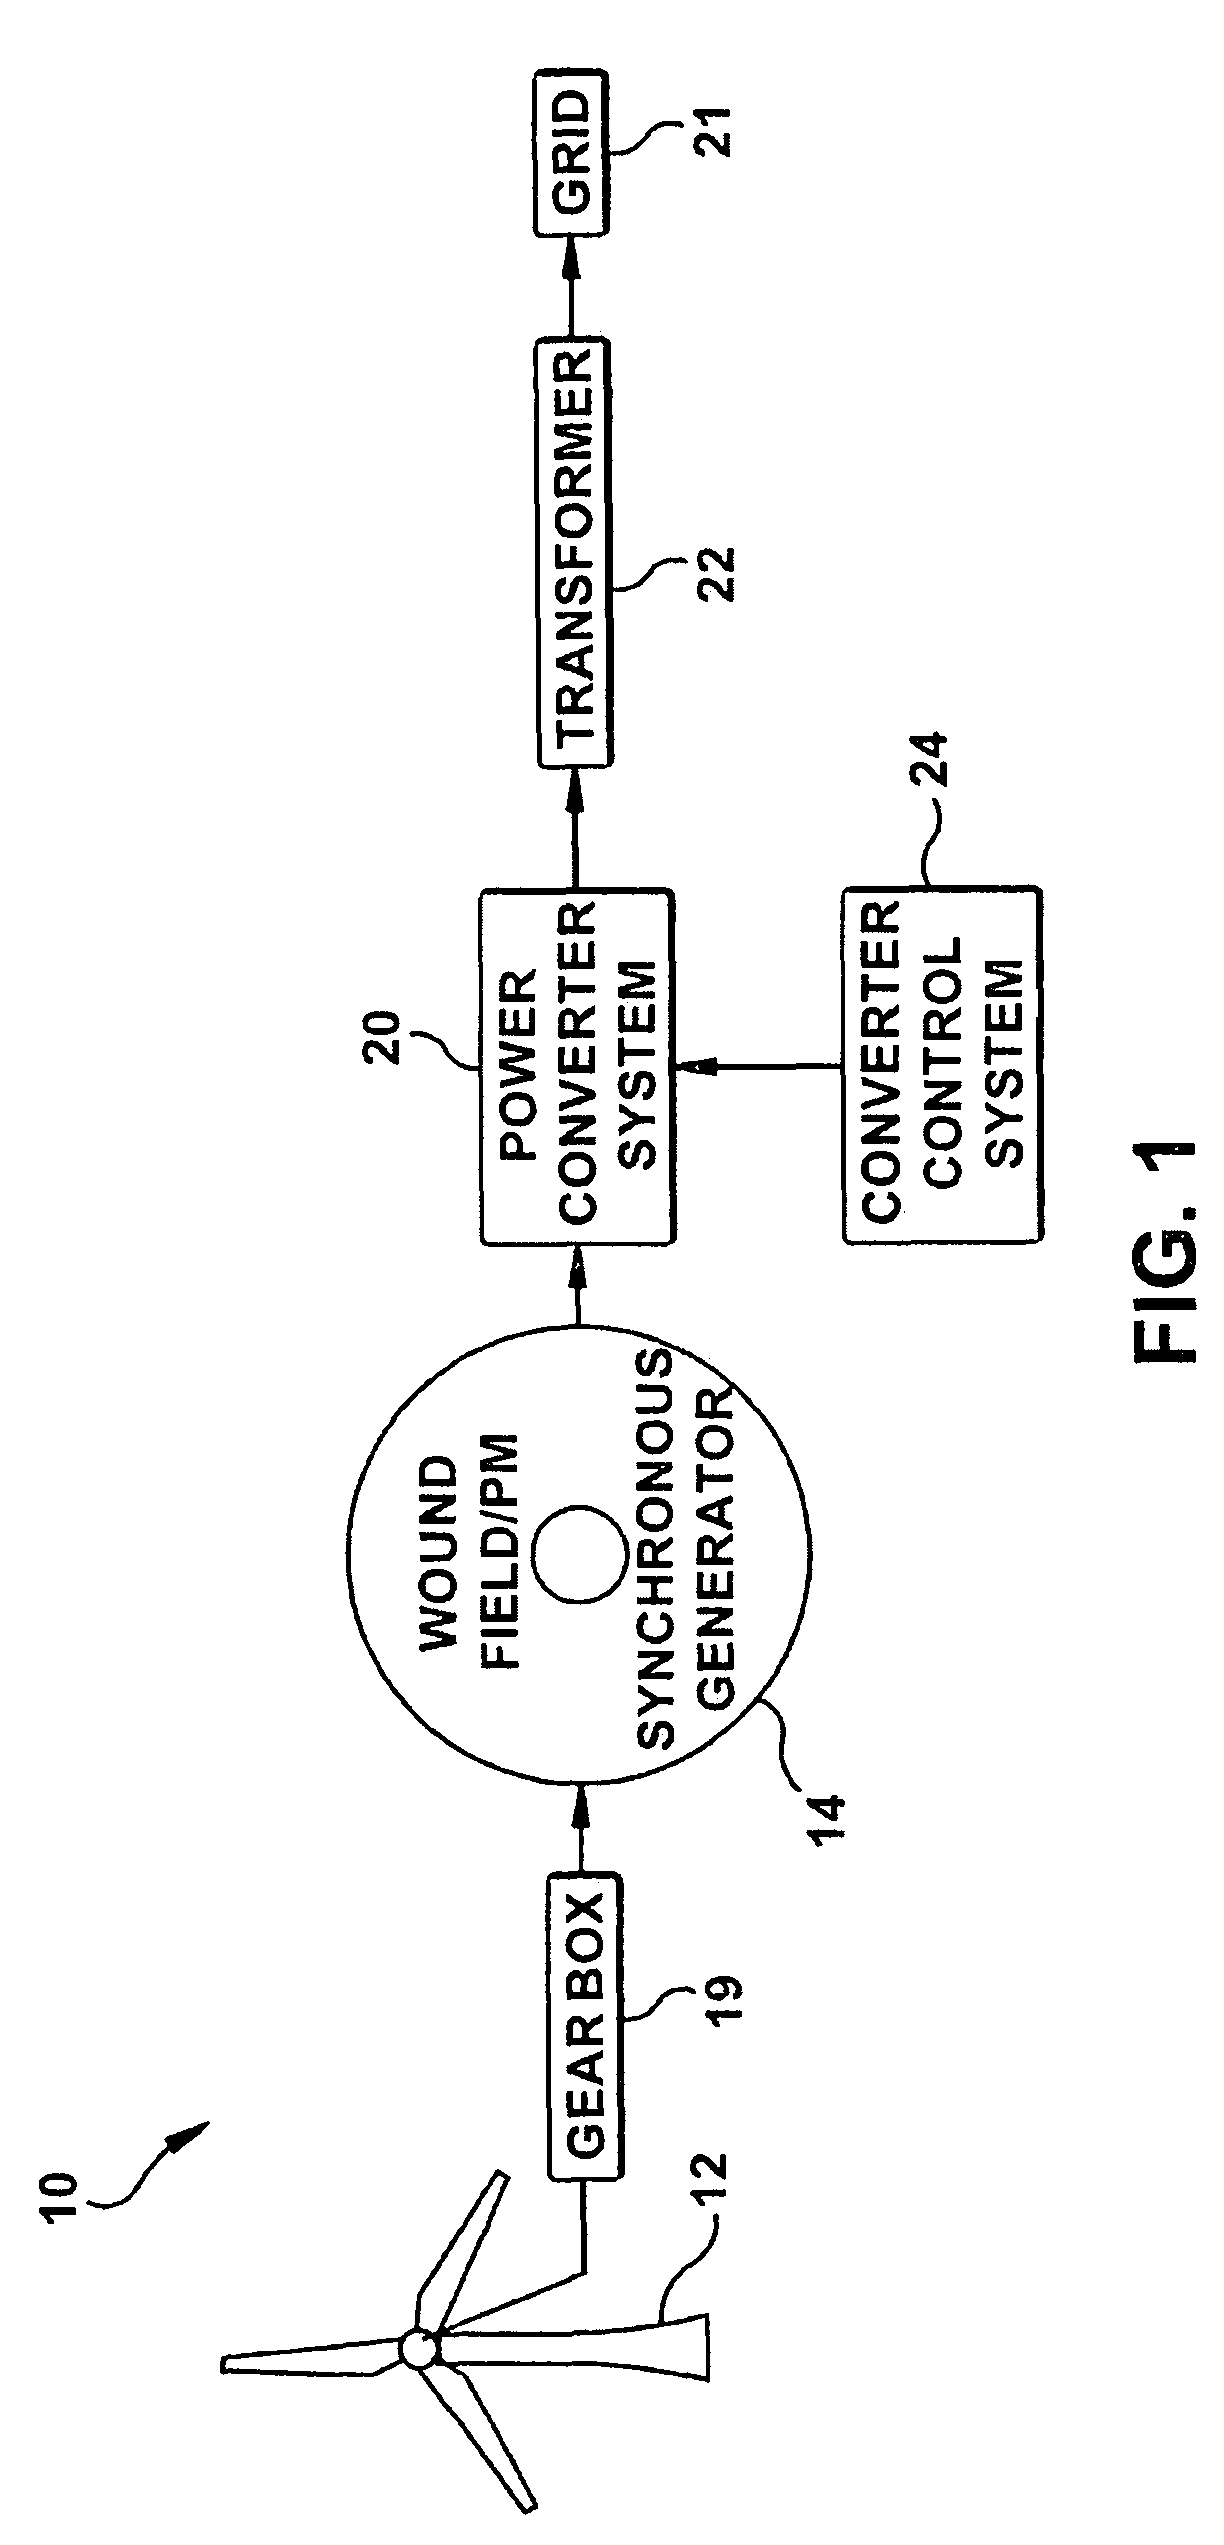 Wind turbine with parallel converters utilizing a plurality of isolated generator windings